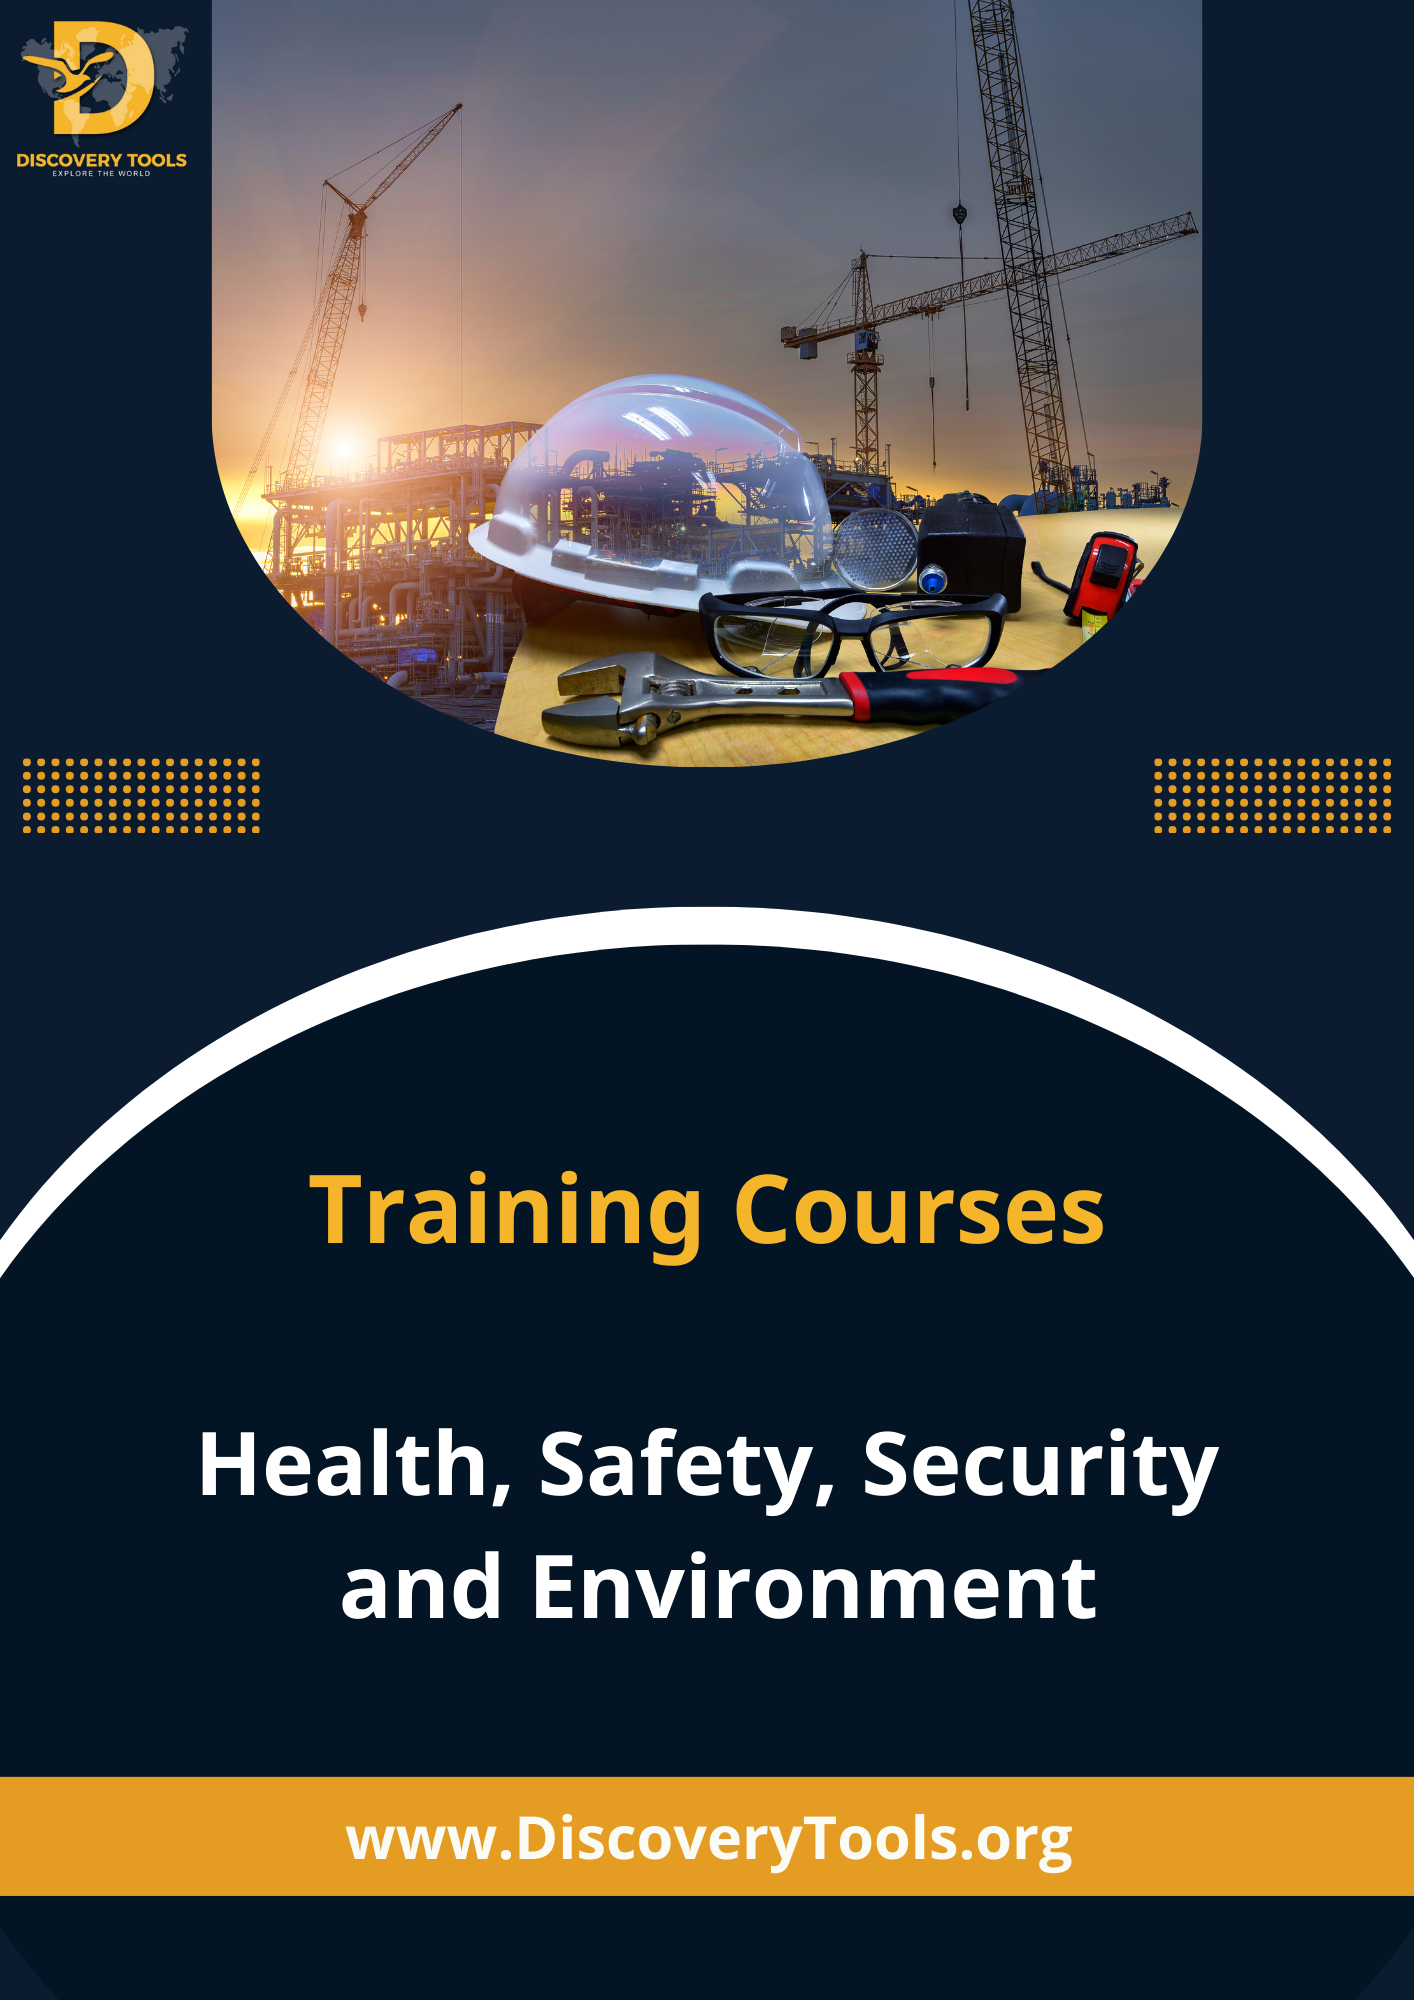 Health, Safety, Security and Environment